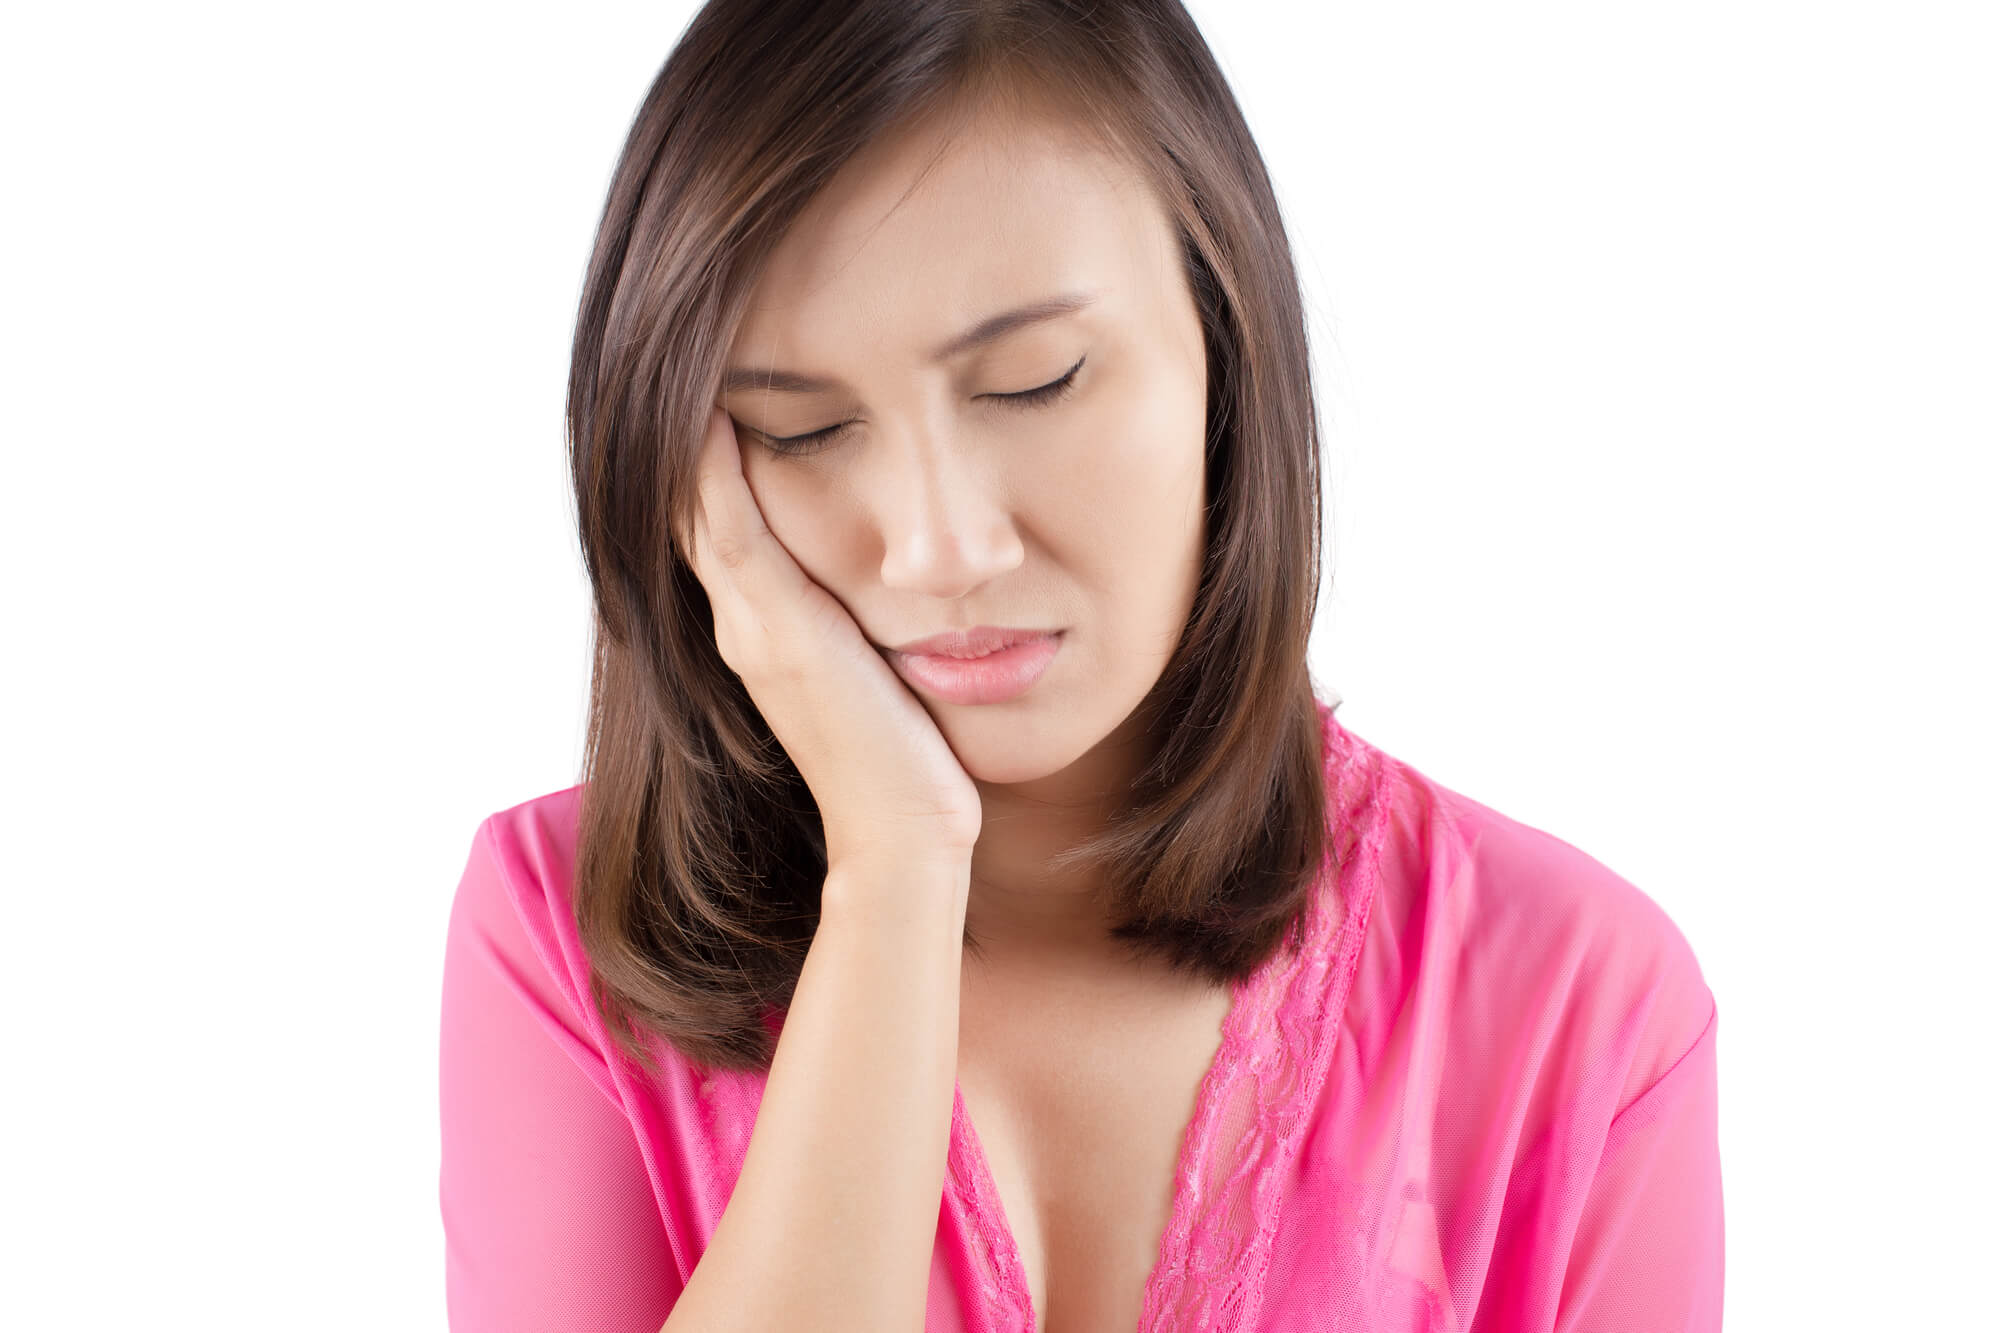 Endodontist 23233 can help you manage pain